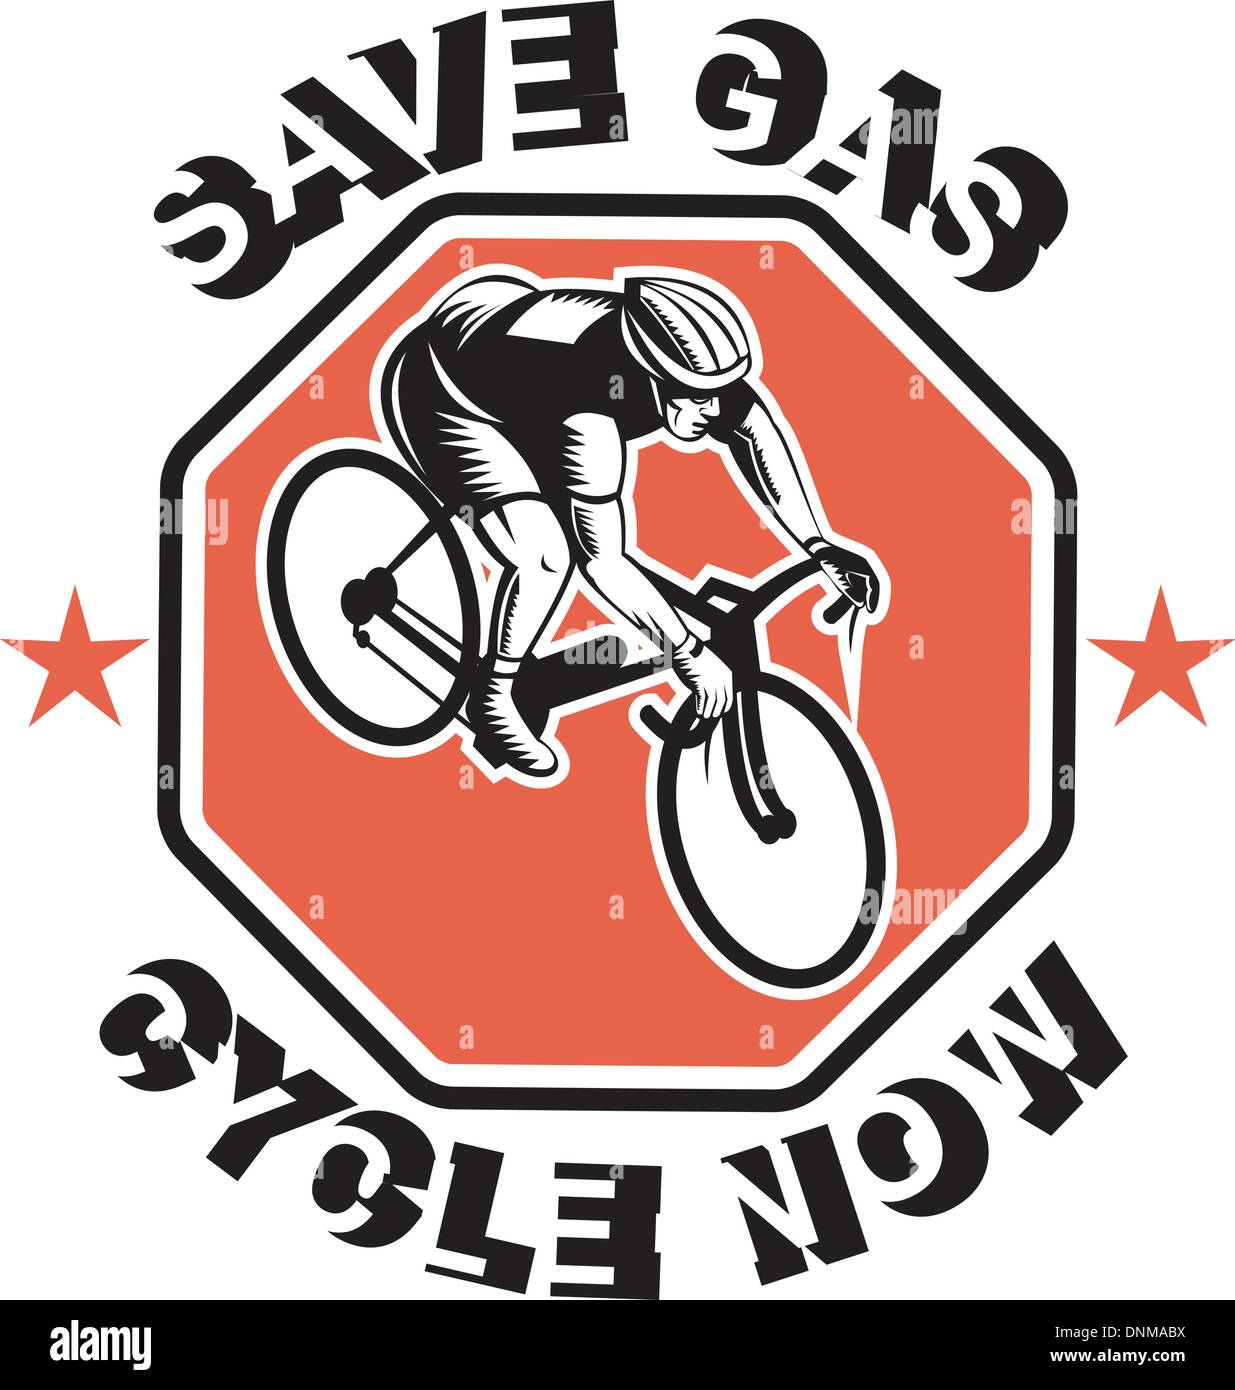 illustration of a Cyclist racing bike set inside octagon viewed from high angle done in retro woodcut style with text saves gas Stock Vector